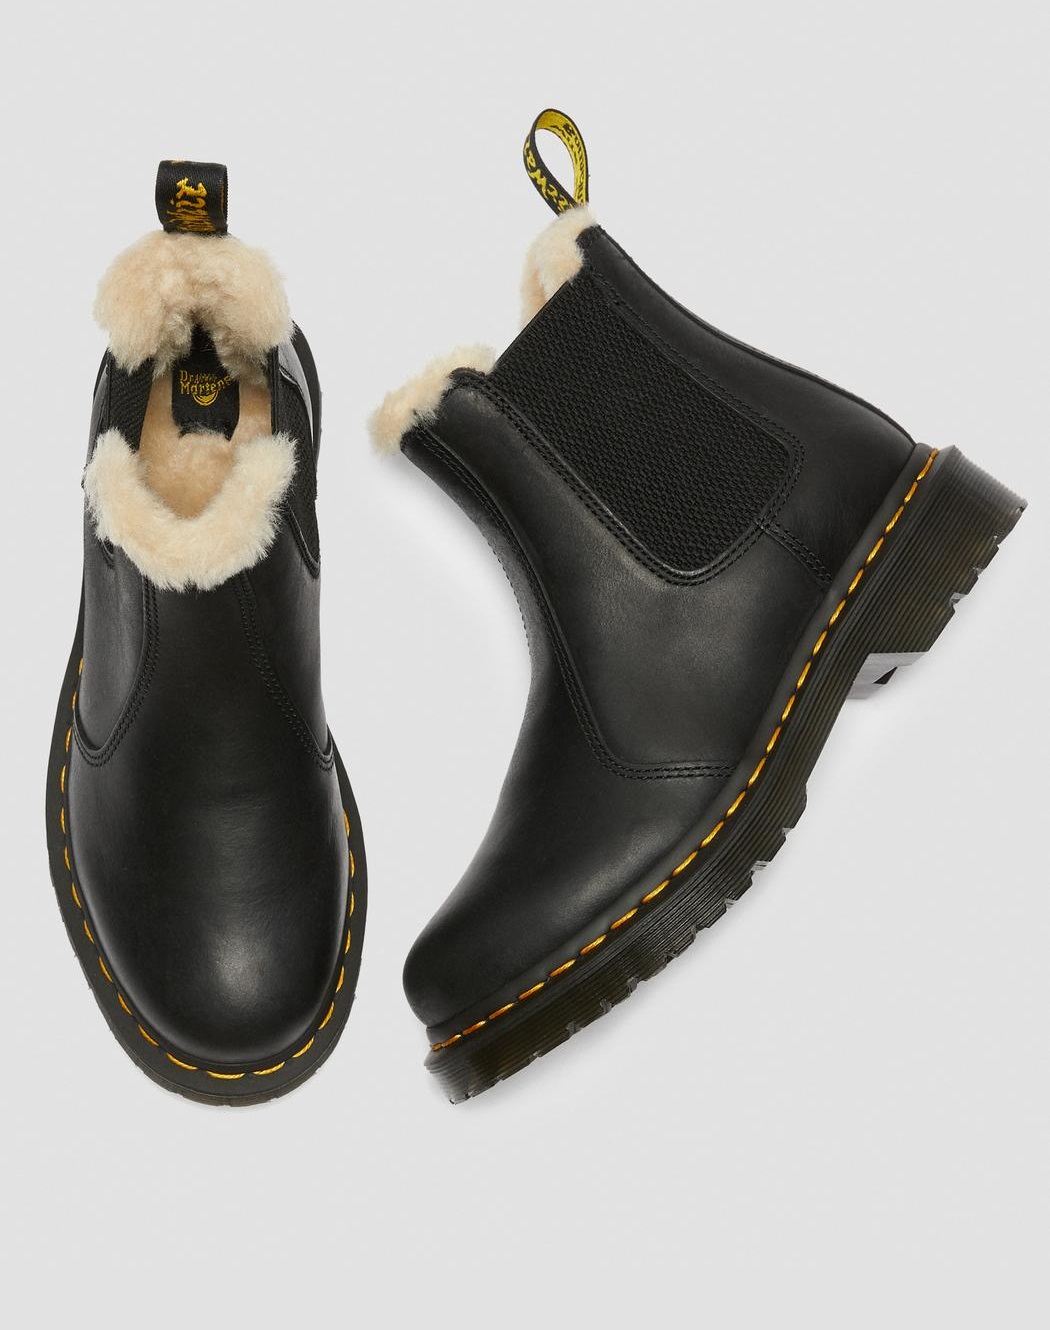 Dr. Martens 2976 Leonore Faux Fur Lined Chelsea Boots Burnished Wyoming Black